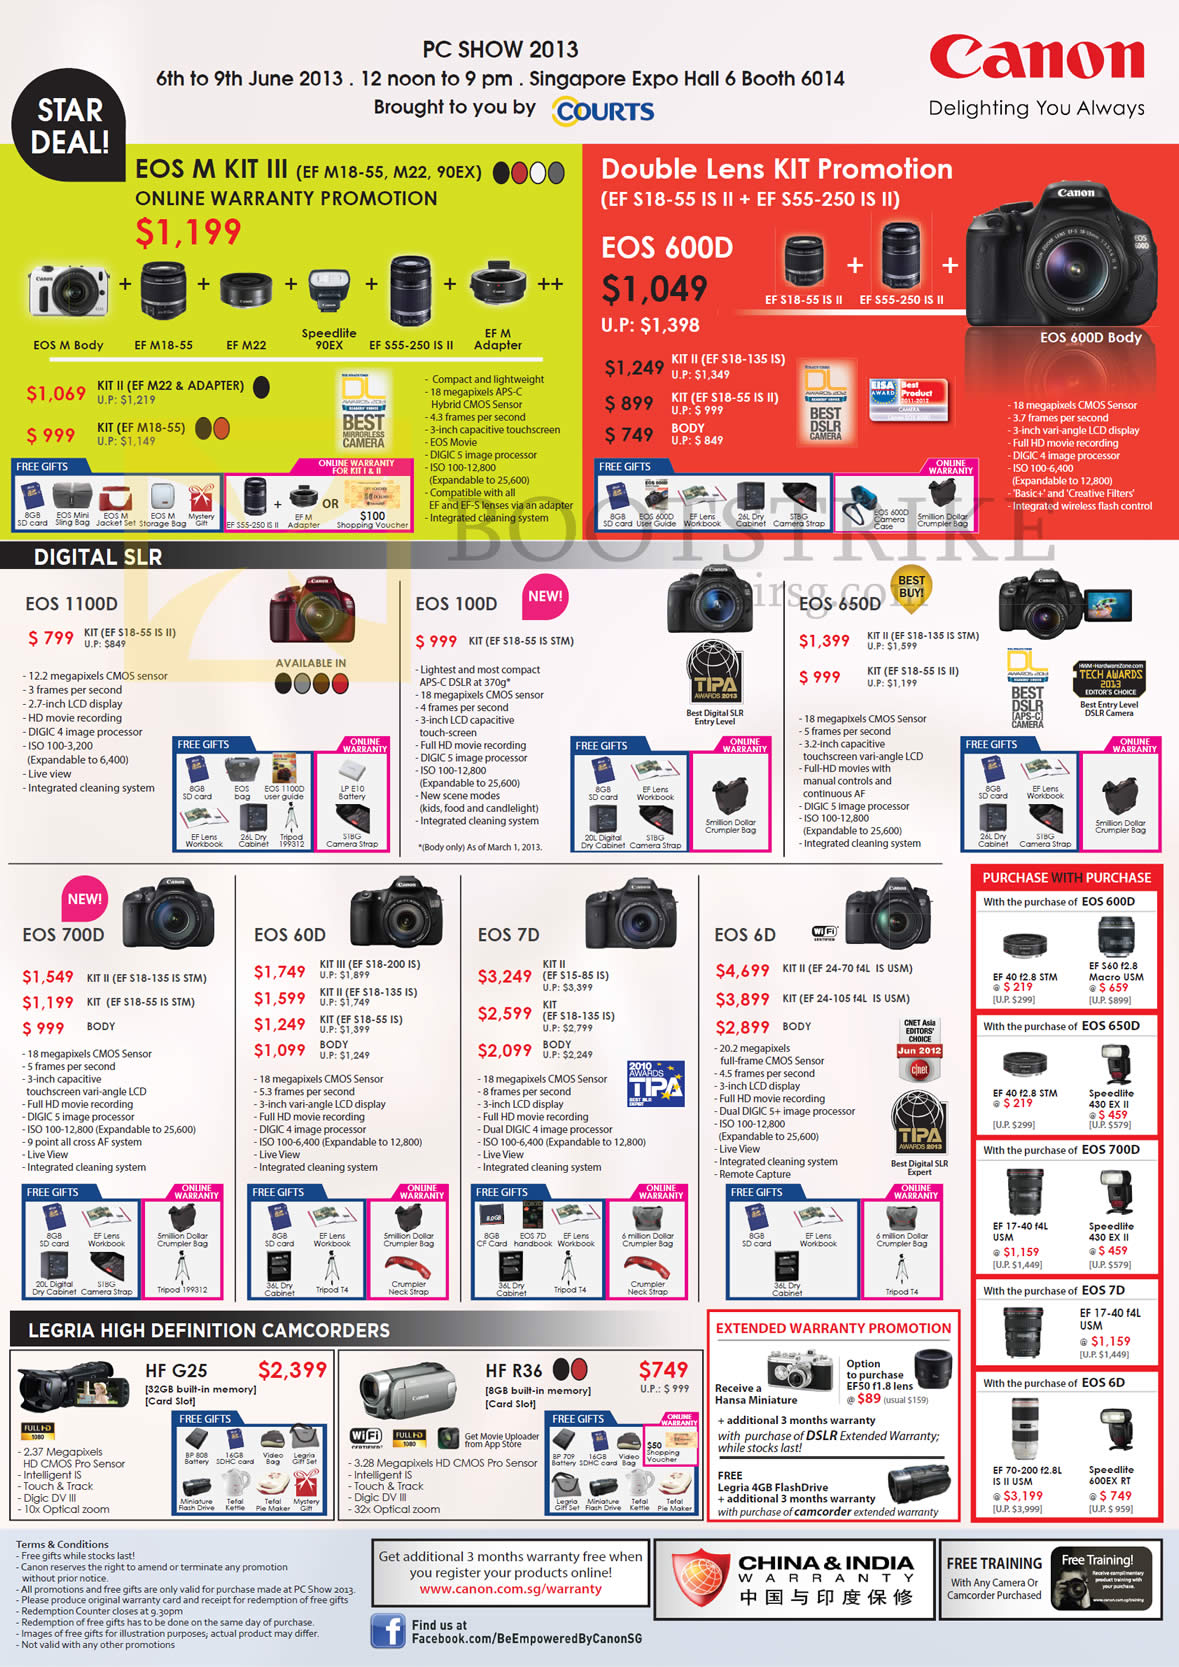 PC SHOW 2013 price list image brochure of Canon Digital Cameras DSLR EOS M, 600D, 1100D, 100D, 650D, 700D, 60D, 7D, 6D, LEGRIA Video Camcorders HF G25, HF R36